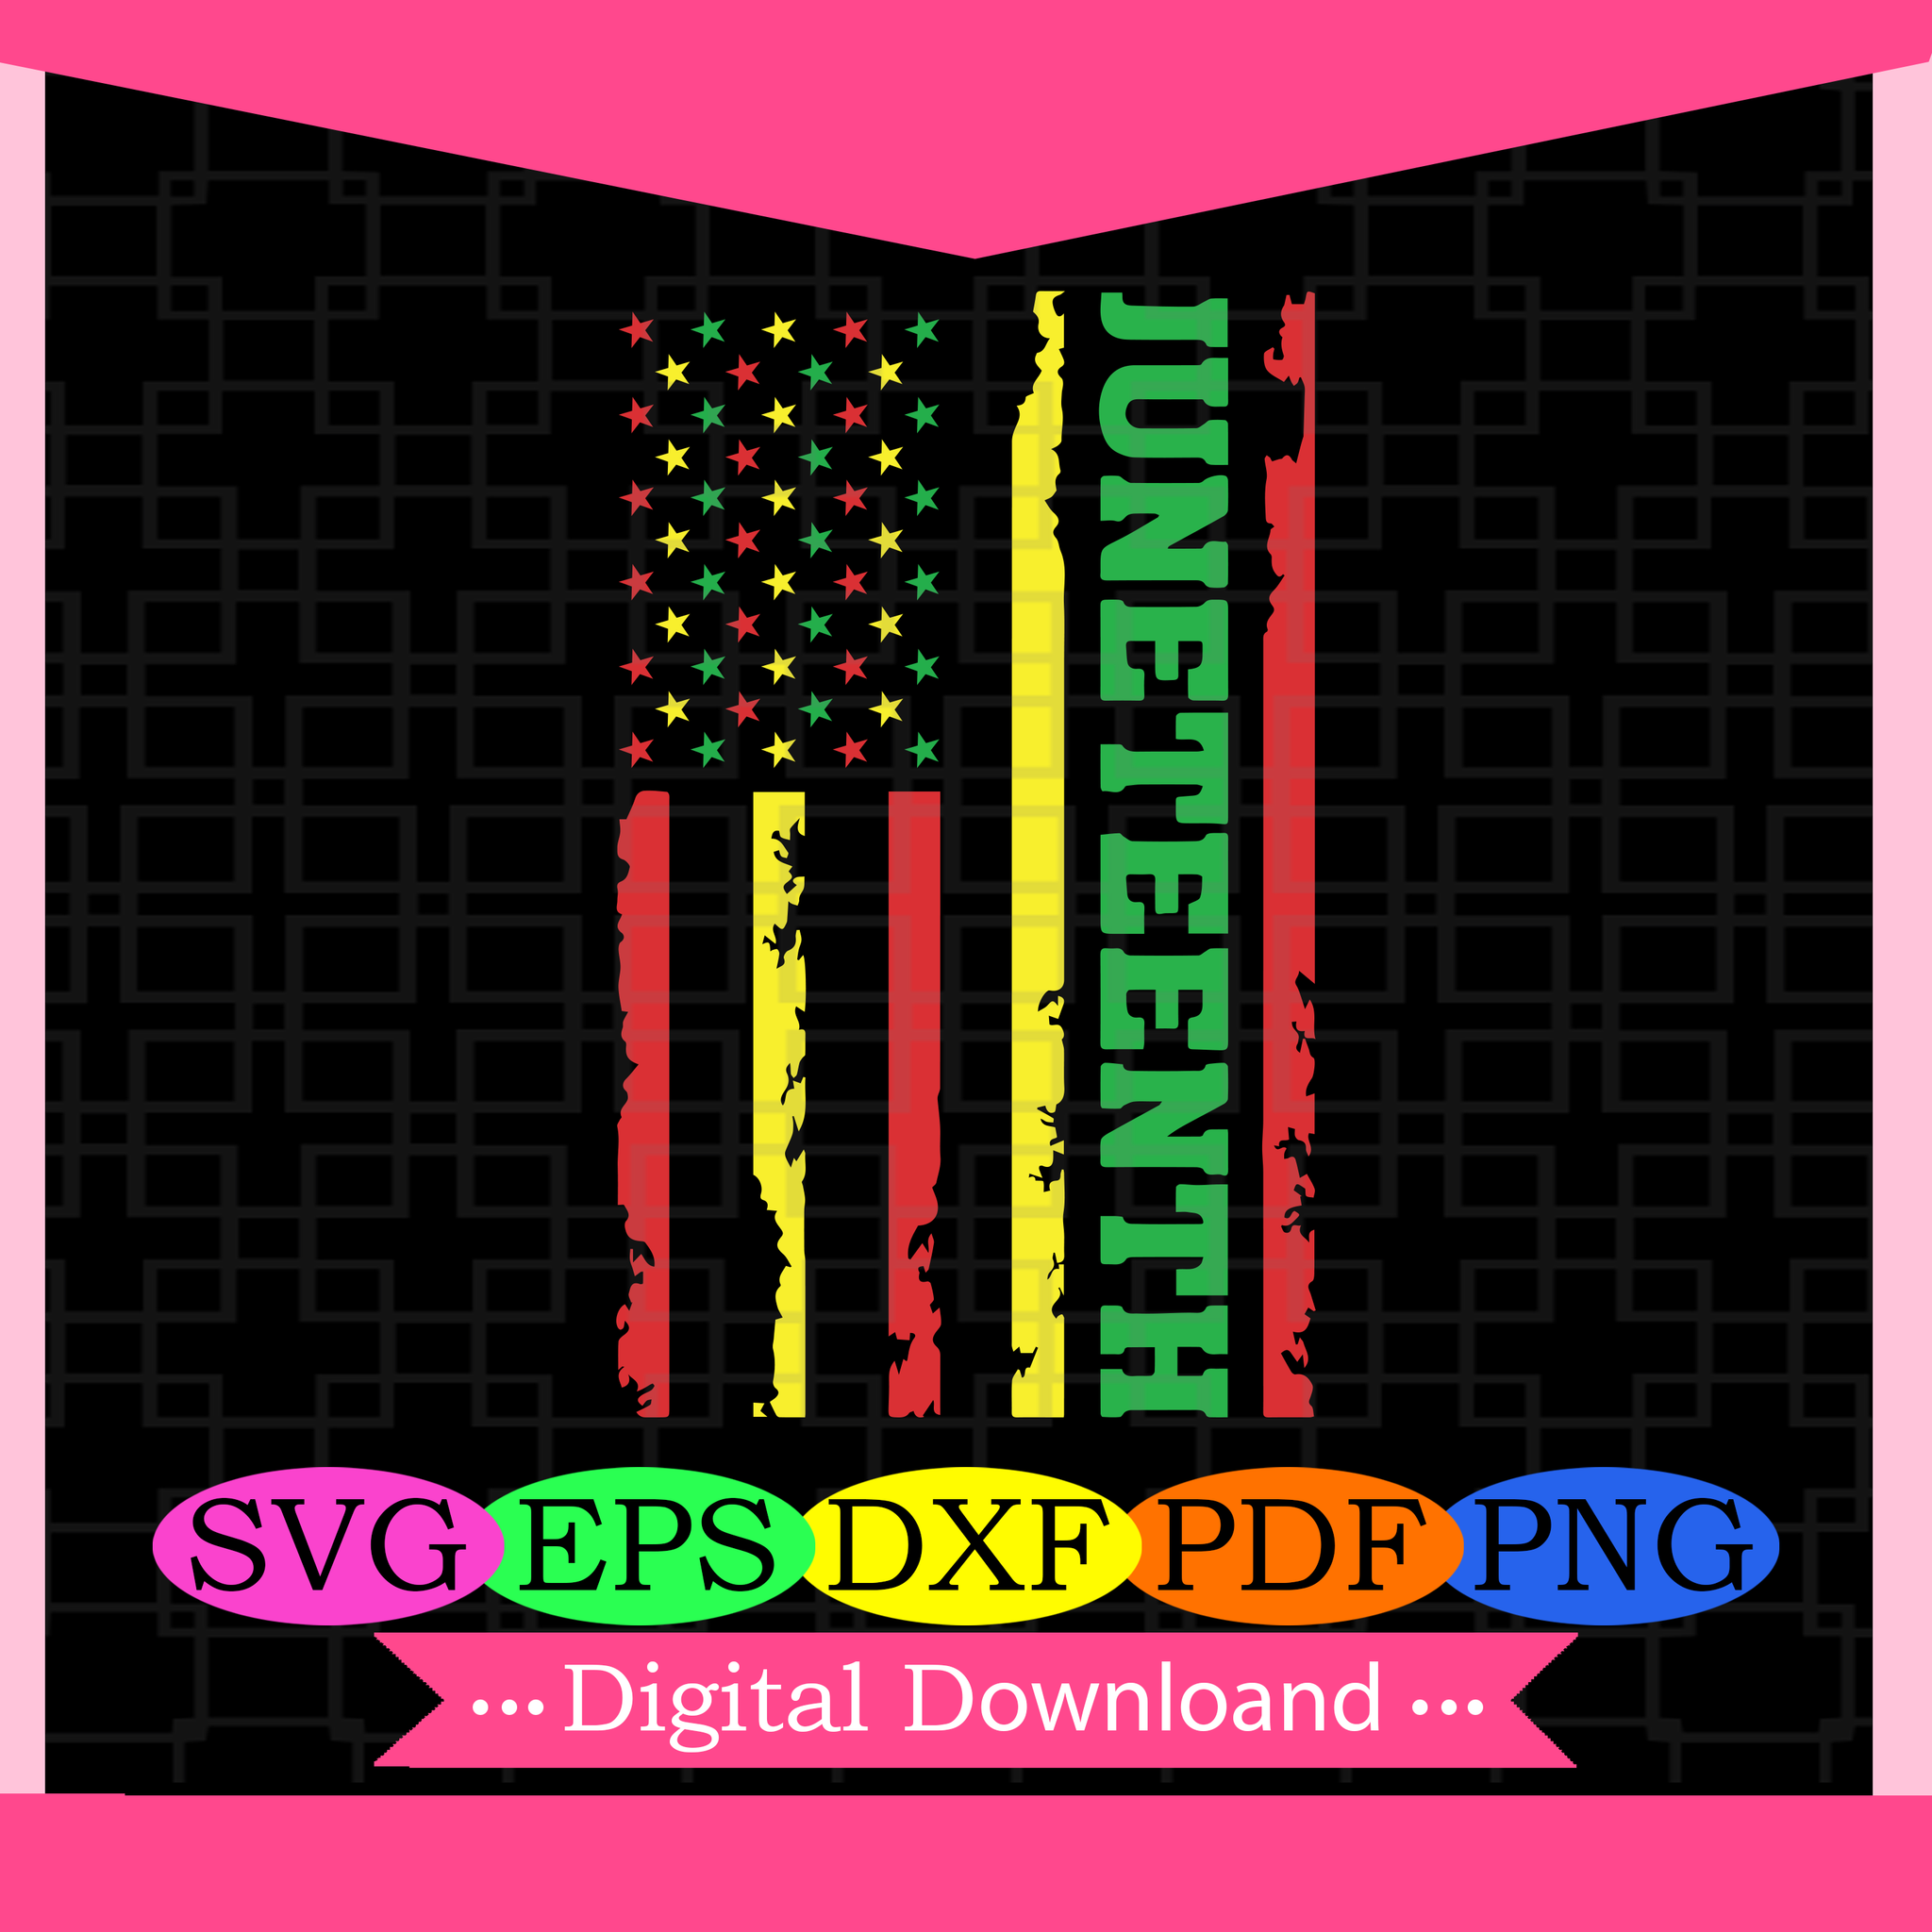 Free Free 337 Freedom Day Svg Peace Love Juneteenth Svg SVG PNG EPS DXF File